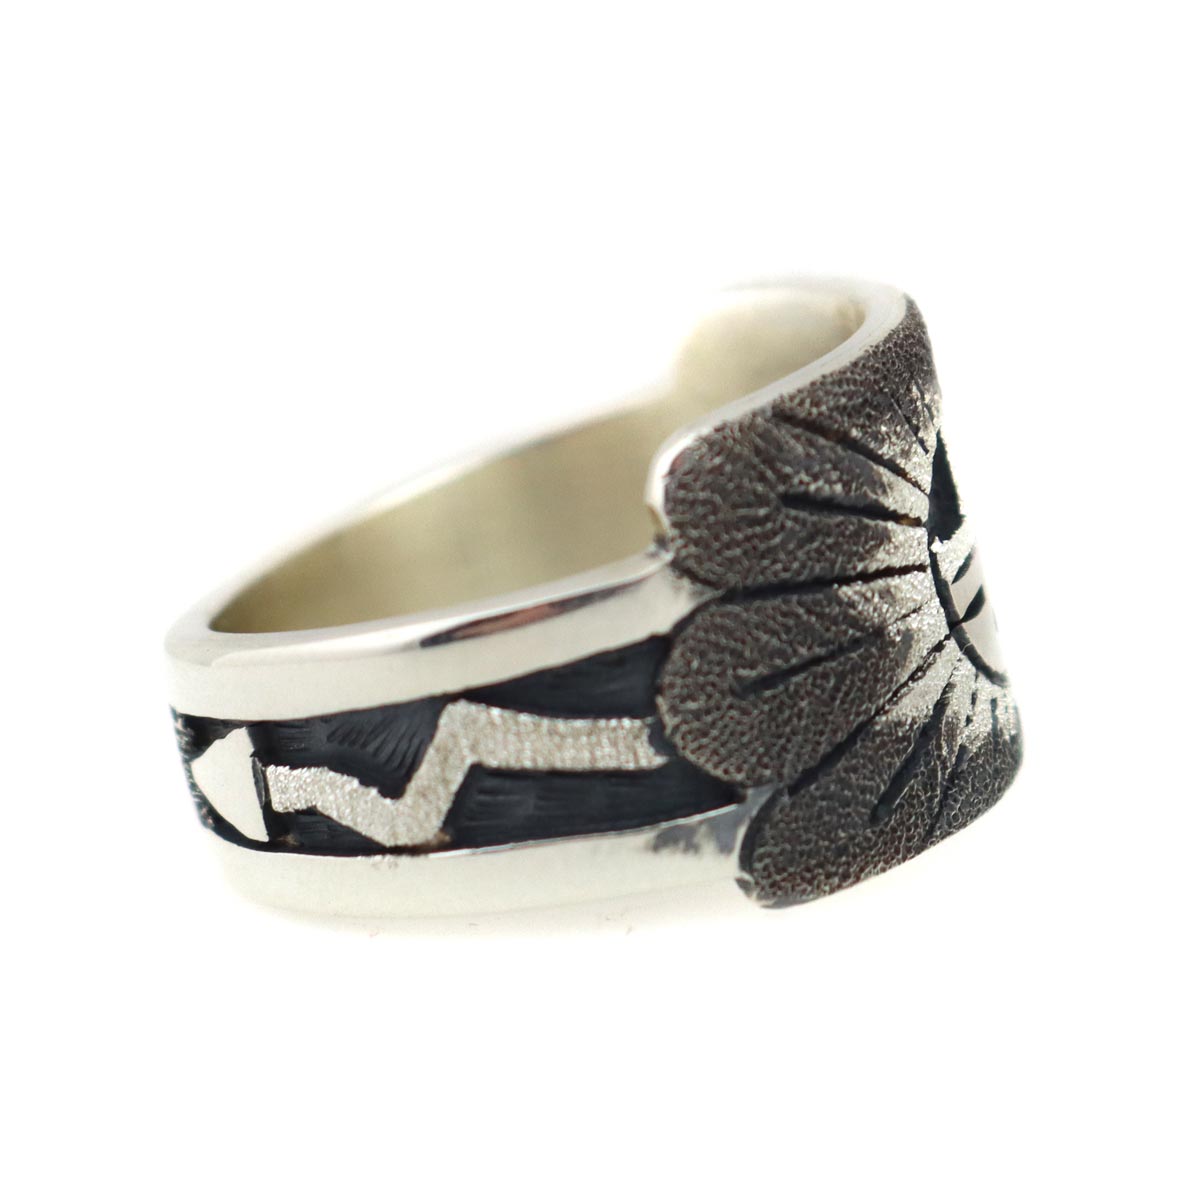 Ronald Wadsworth - Hopi Contemporary Sterling Silver Overlay Ring with Sunface Kachina Design, size 7.75 (J14776) 1
